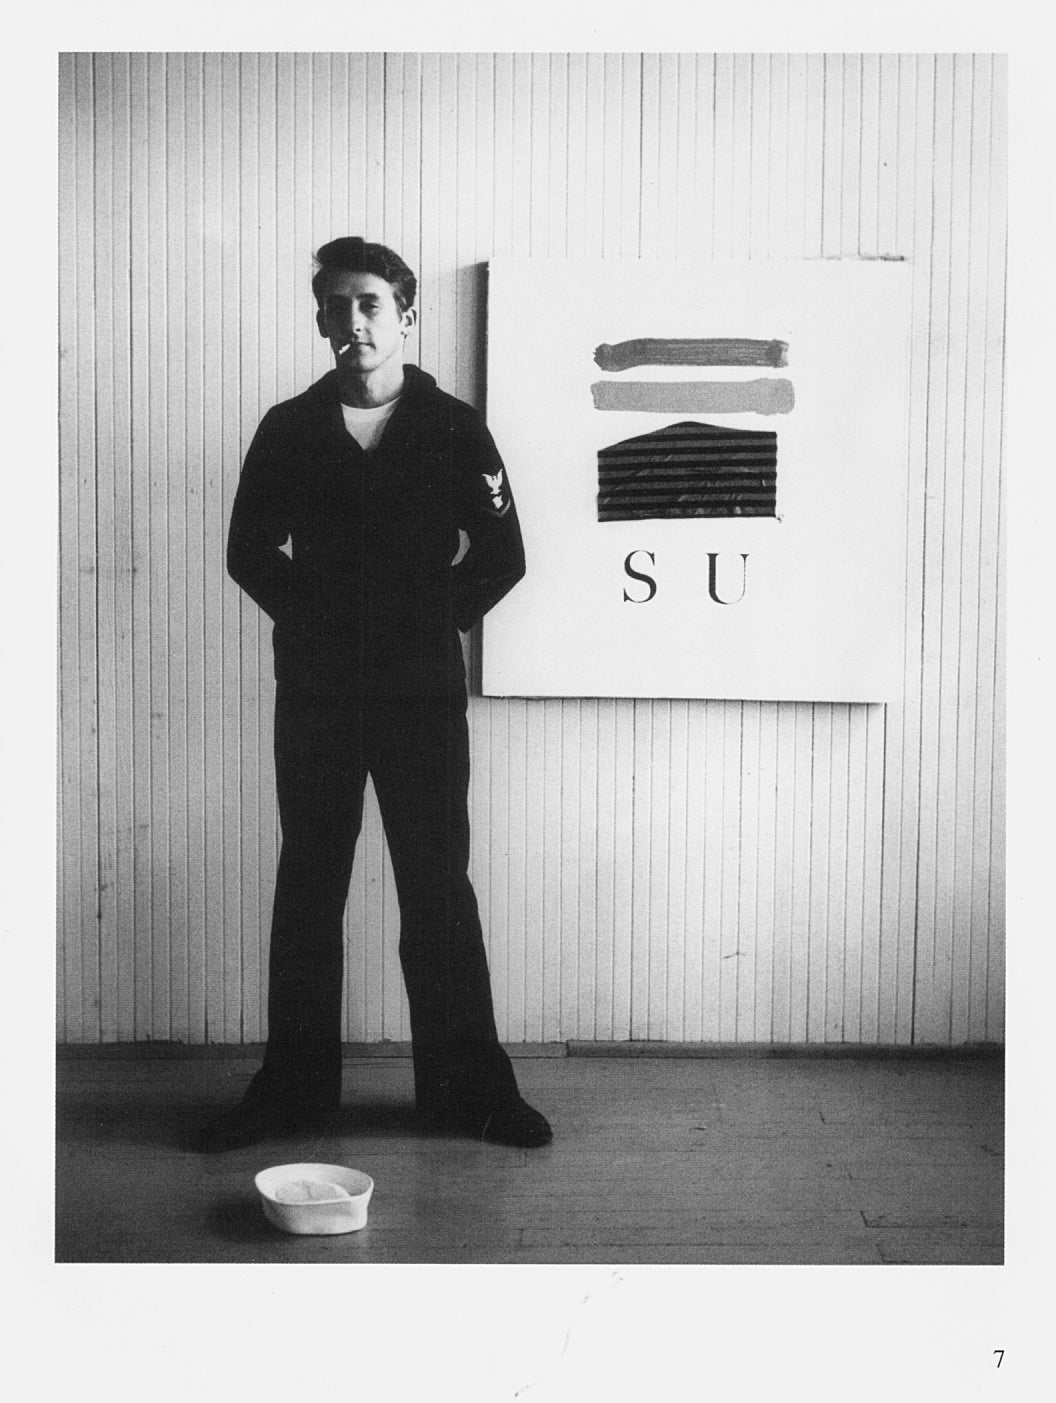 Picturing Ed: Jerry McMillan's Photographs of Ed Ruscha 1958-1972